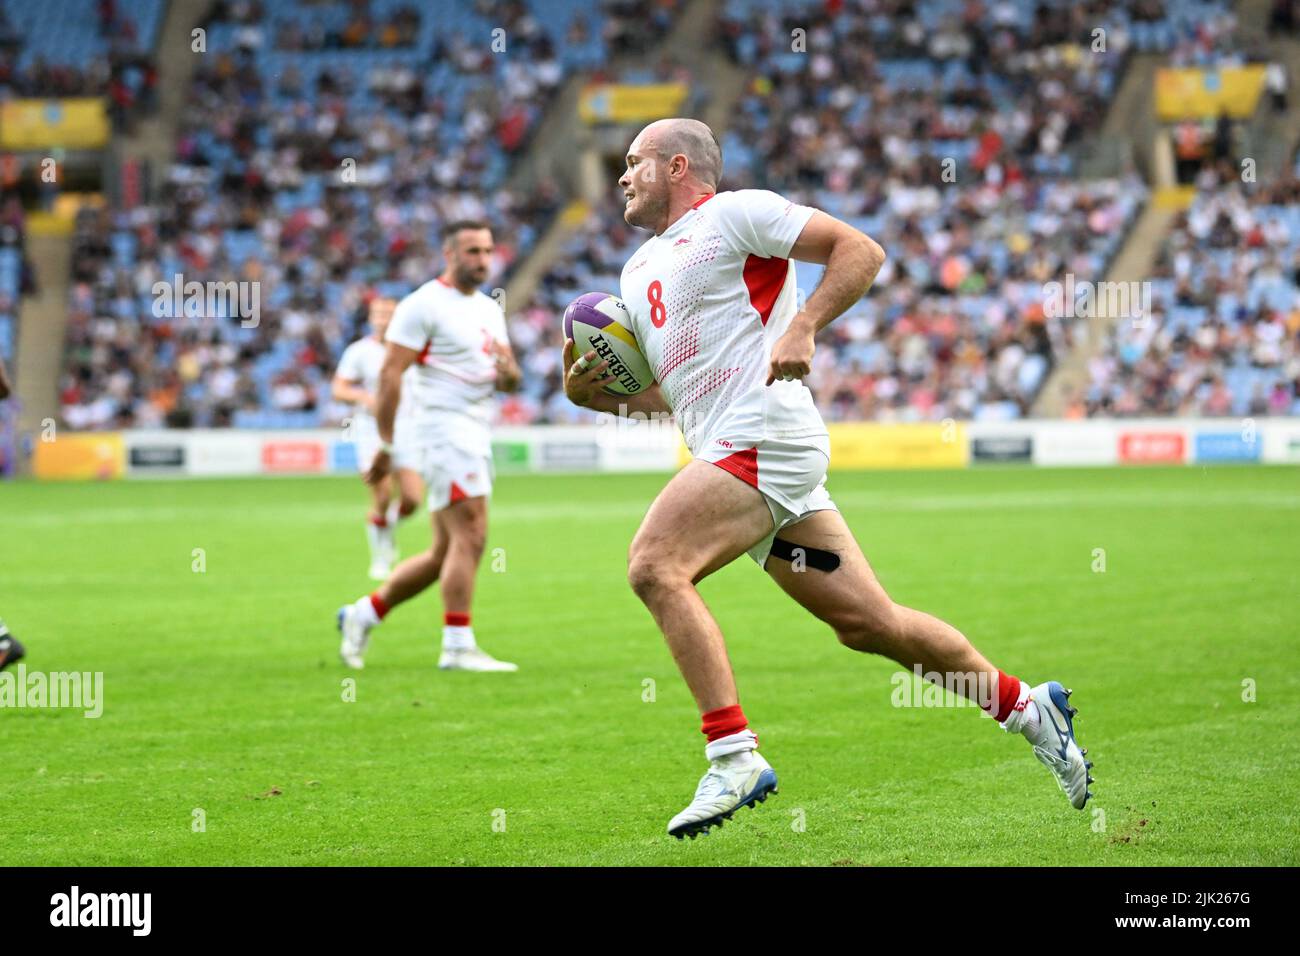 Tom Bowen of England scores a try against Sri Lanka during the Rugby Sevens at the Commonwealth Games at Coventry Stadium on Friday 29th July 2022. Credit: MI News & Sport /Alamy Live News Stock Photo